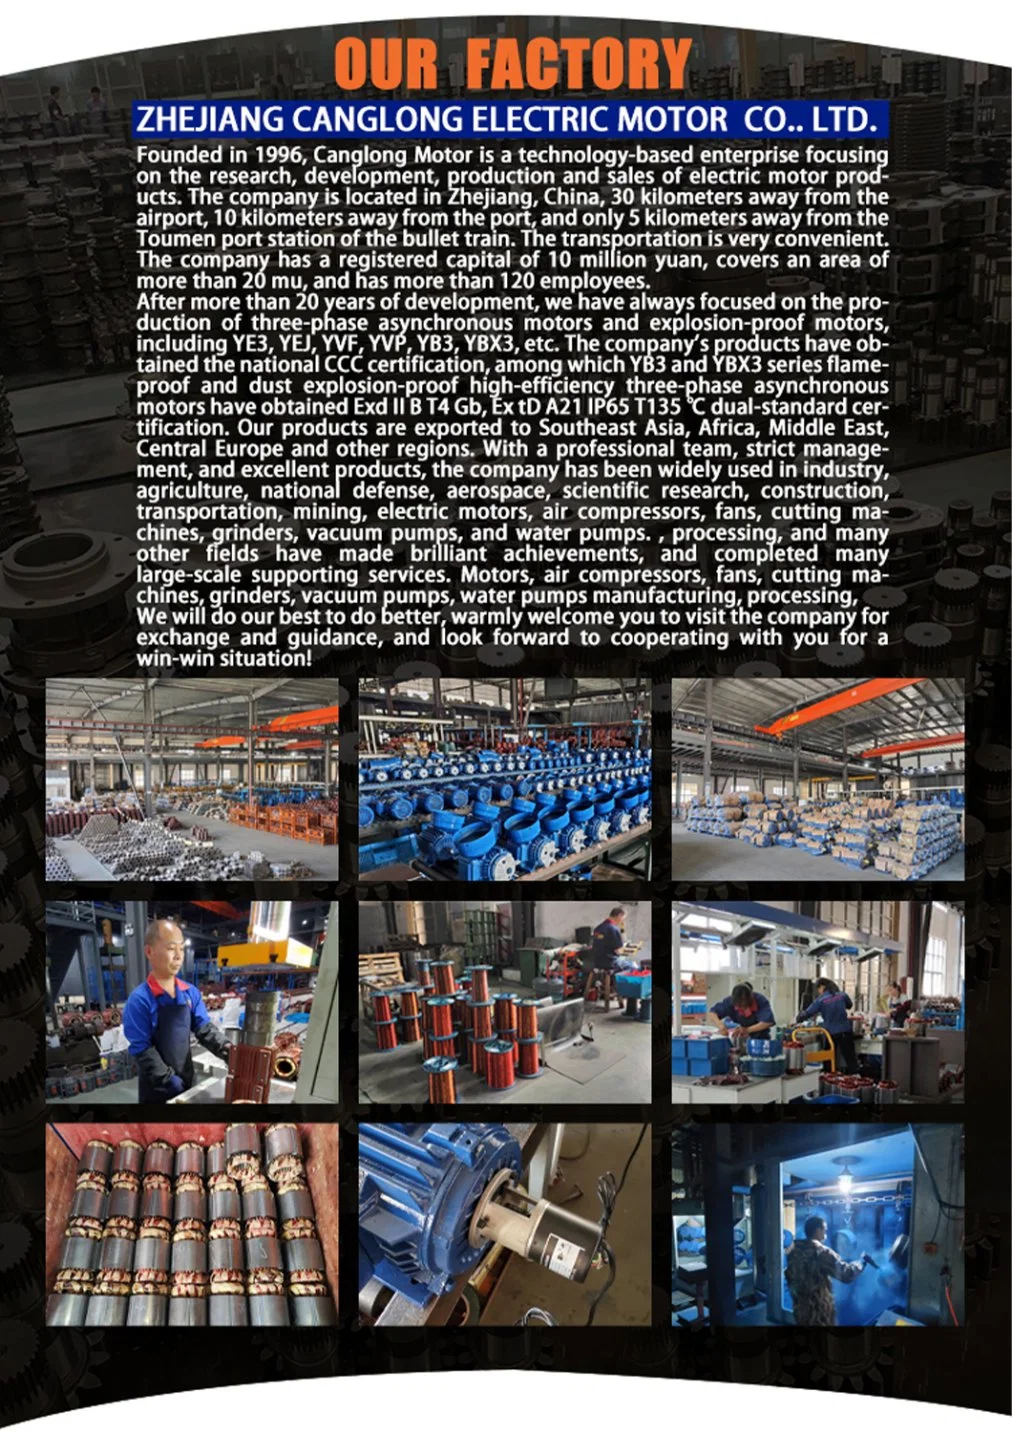 Heavy Duty Electric Motors for Crusher Ye3/Ie3/Ie4 -160, 7.5 Kw -11 Kw Copper Three-Phase Asynchronous Motors for Petrochemical Equipment